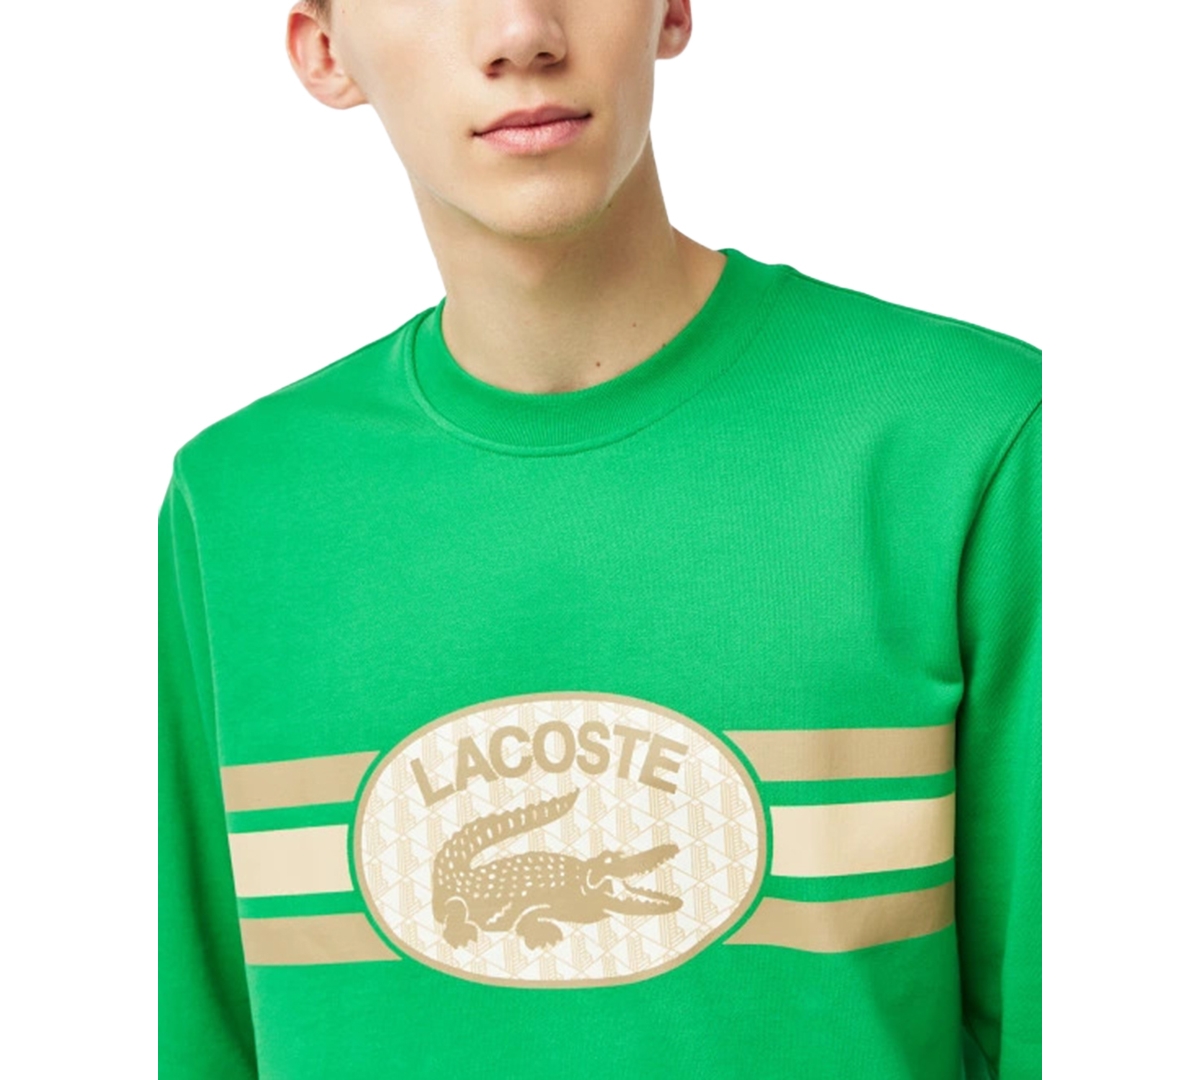 LACOSTE MEN'S CLASSIC-FIT LOGO-PRINT FRENCH TERRY SWEATSHIRT